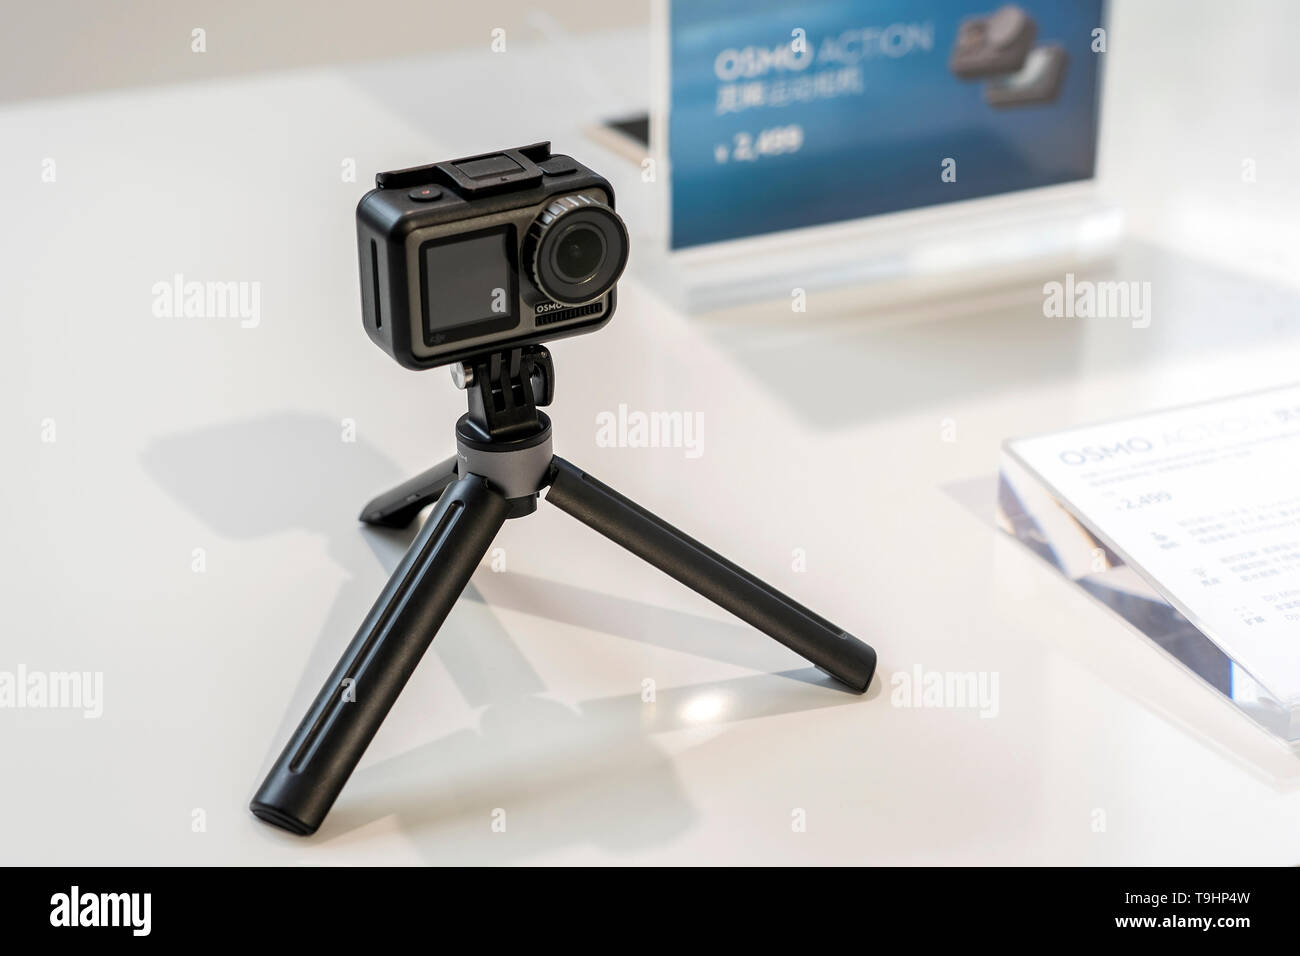 CHINA, SHANGHAI - MAY 18, 2019. DJI OSMO ACTION IN PROTECTED CASE AND TRIPOD OR SELFIE STICK. Stock Photo